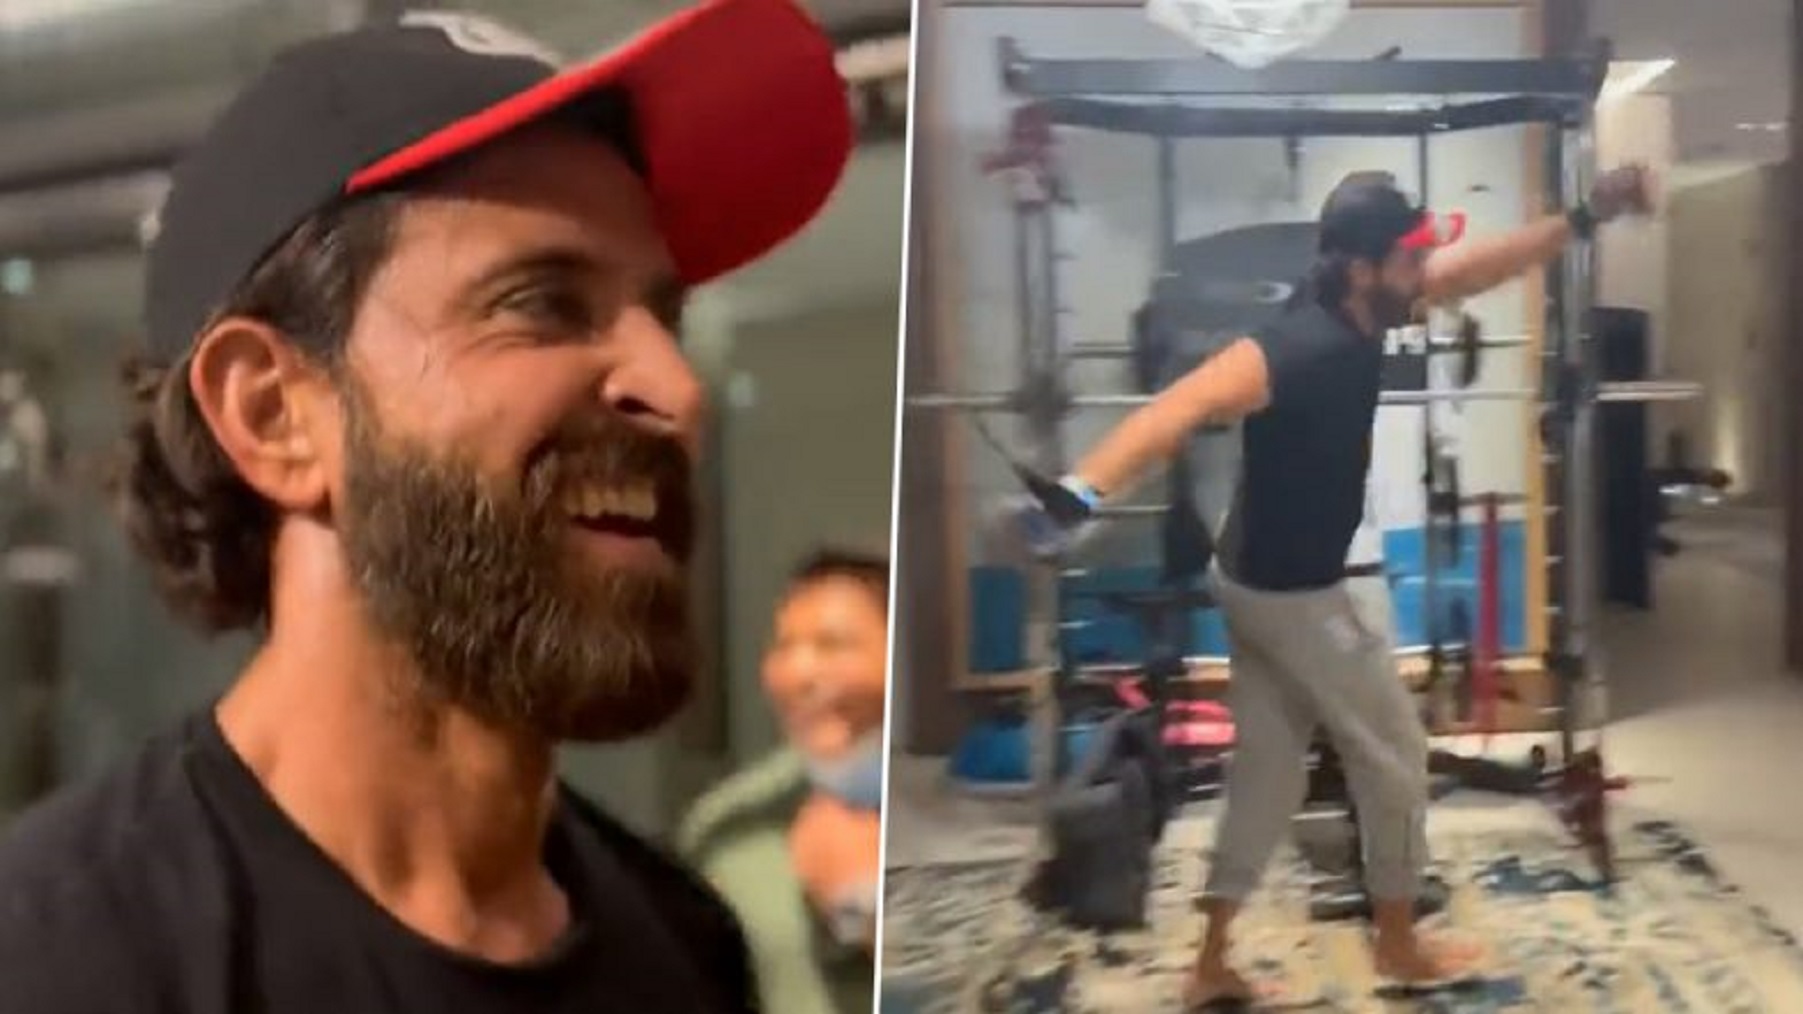 Hrithik Roshan Breaks Into Garba Dance On 80’s Bollywood Music In The Middle Of His Gym Workout, The Goofy Video Goes Viral